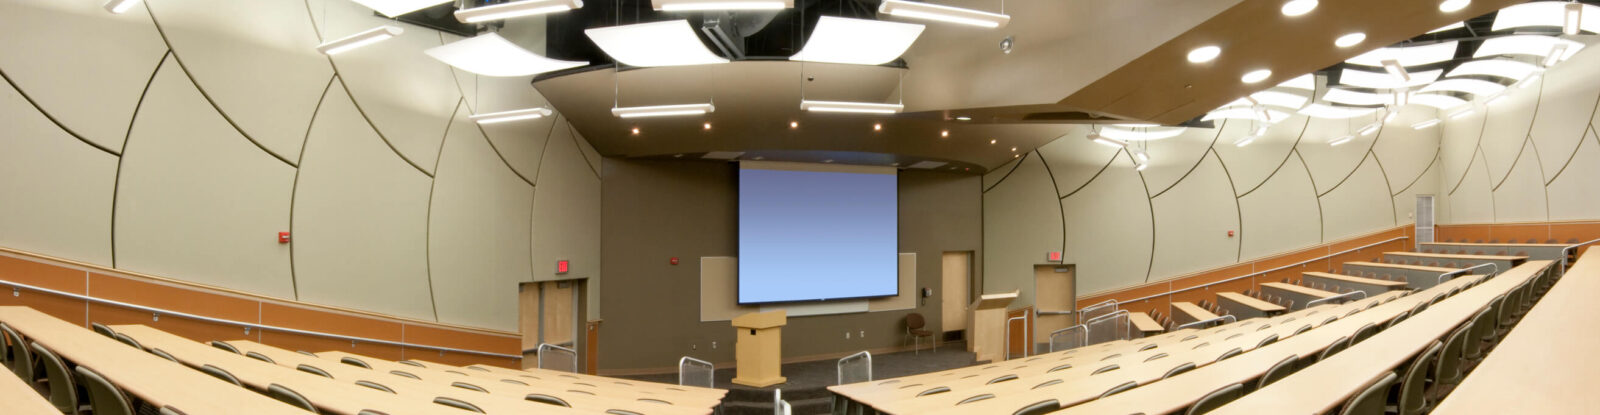 Empty lecture hall with podium and screen at the front of the room